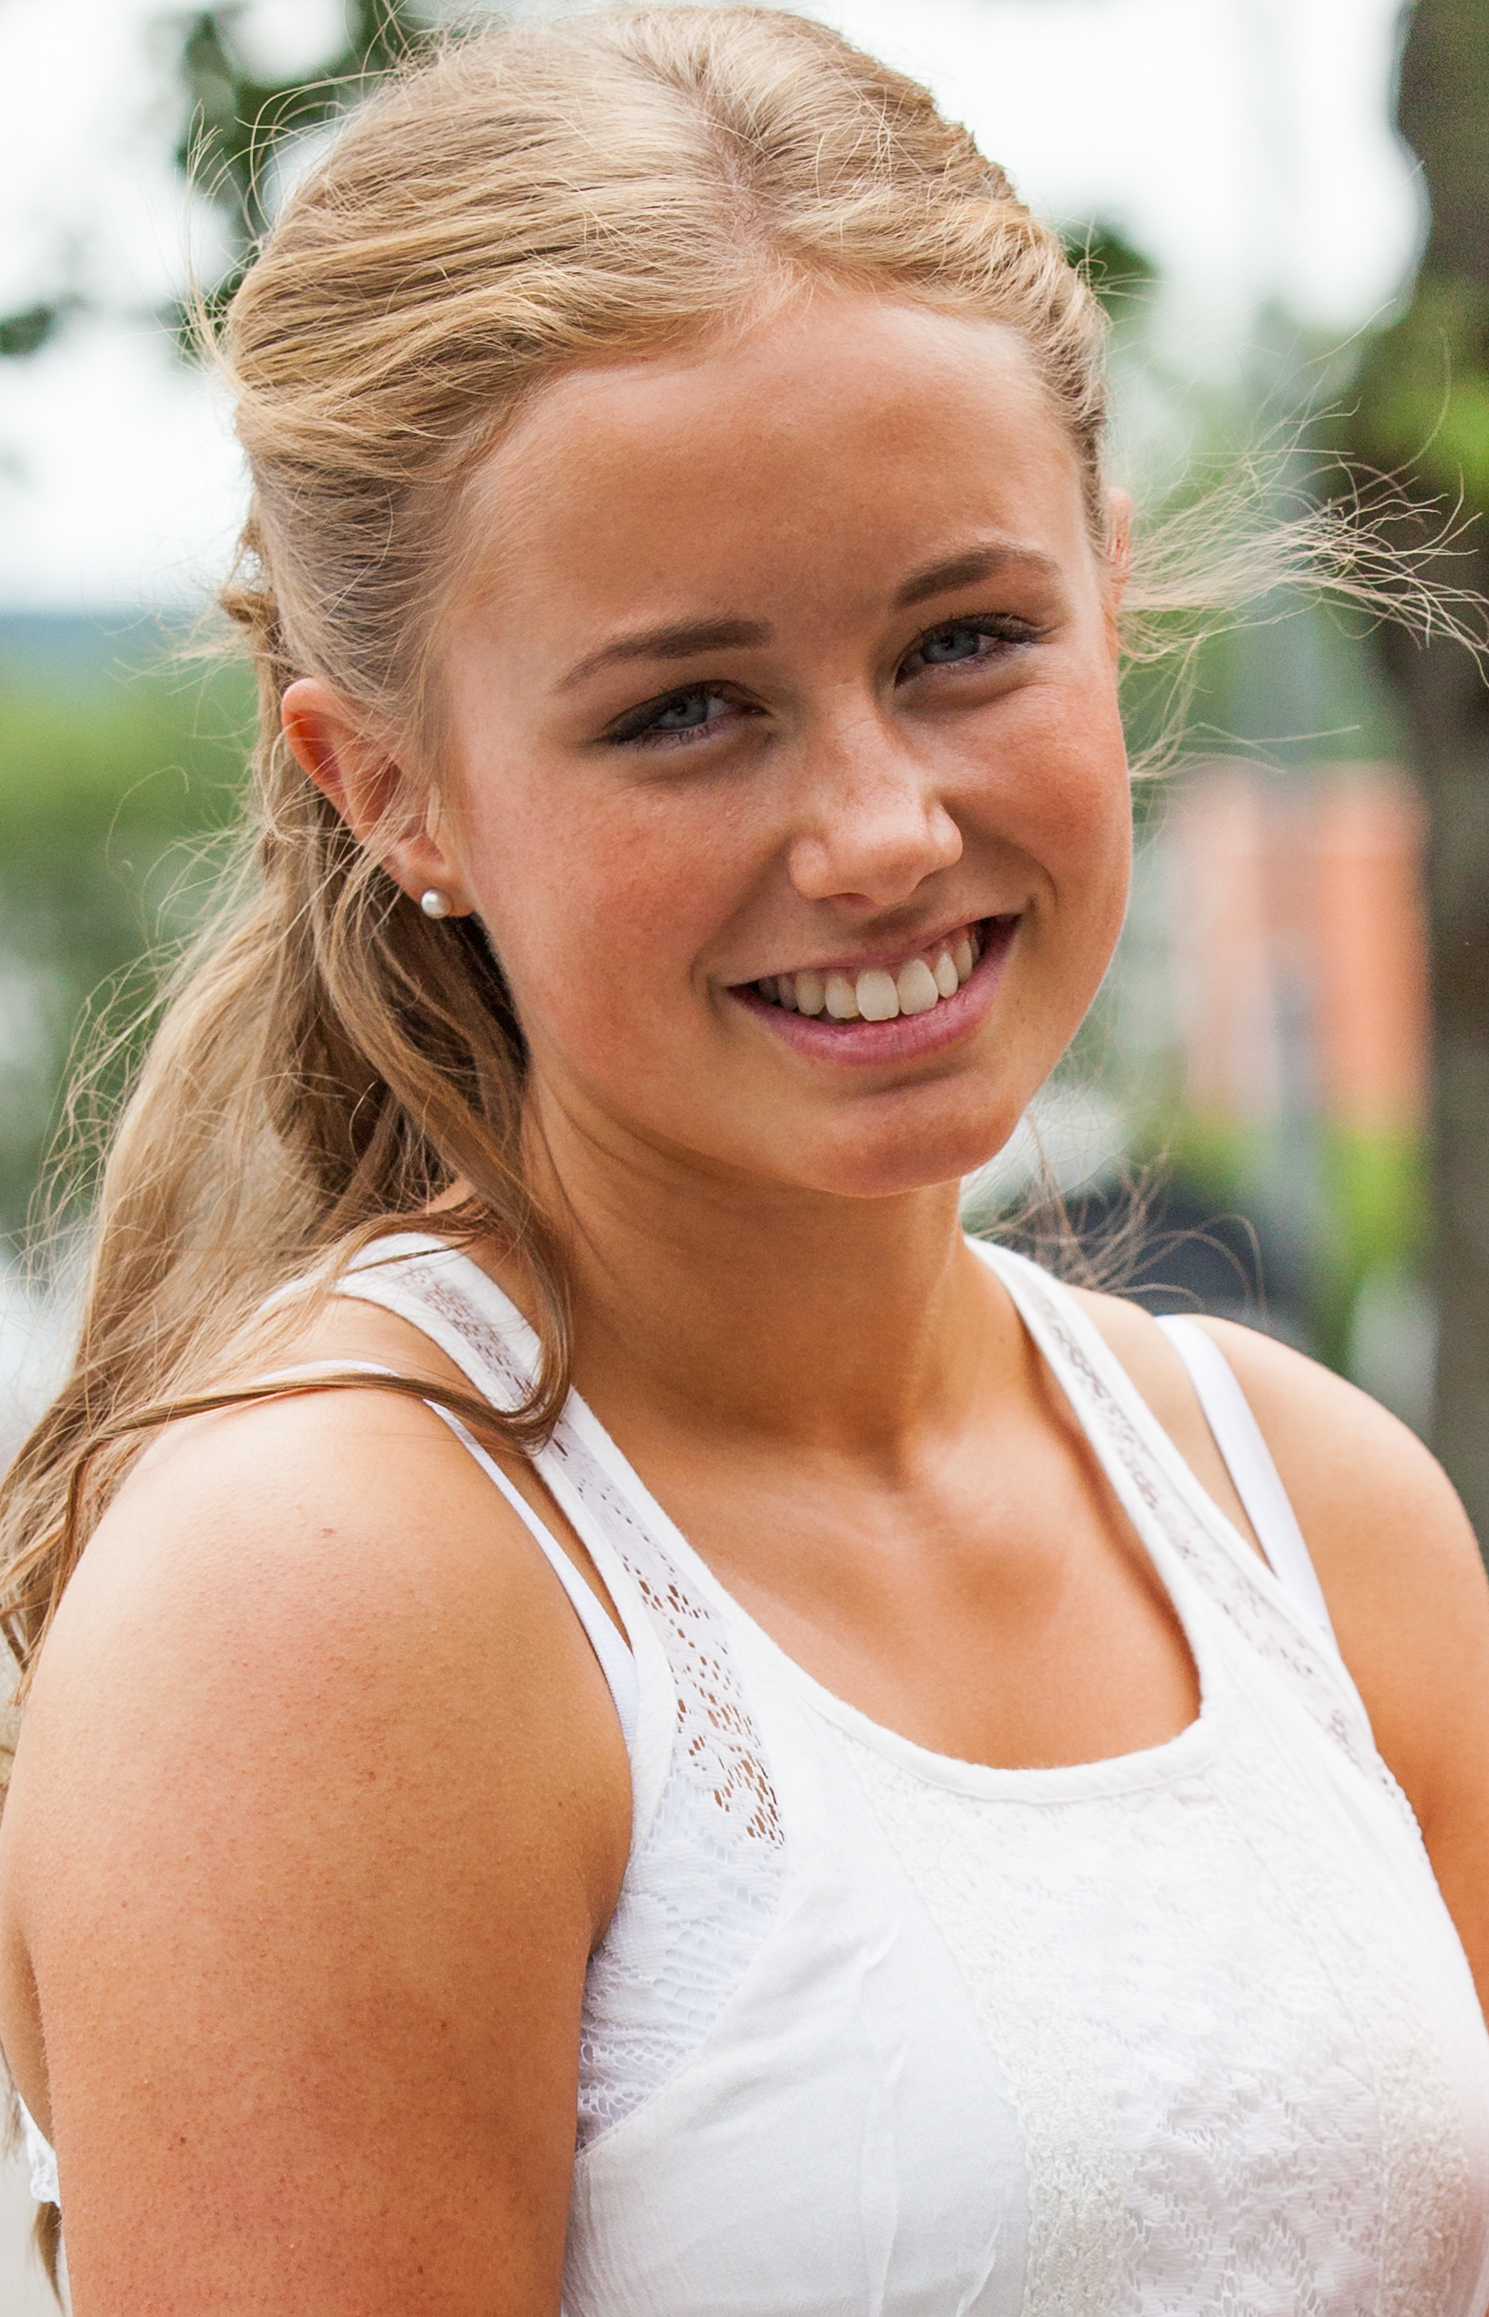 a blond beautiful girl photographed in Sigtuna, Sweden in June 2014, picture 1 out 20